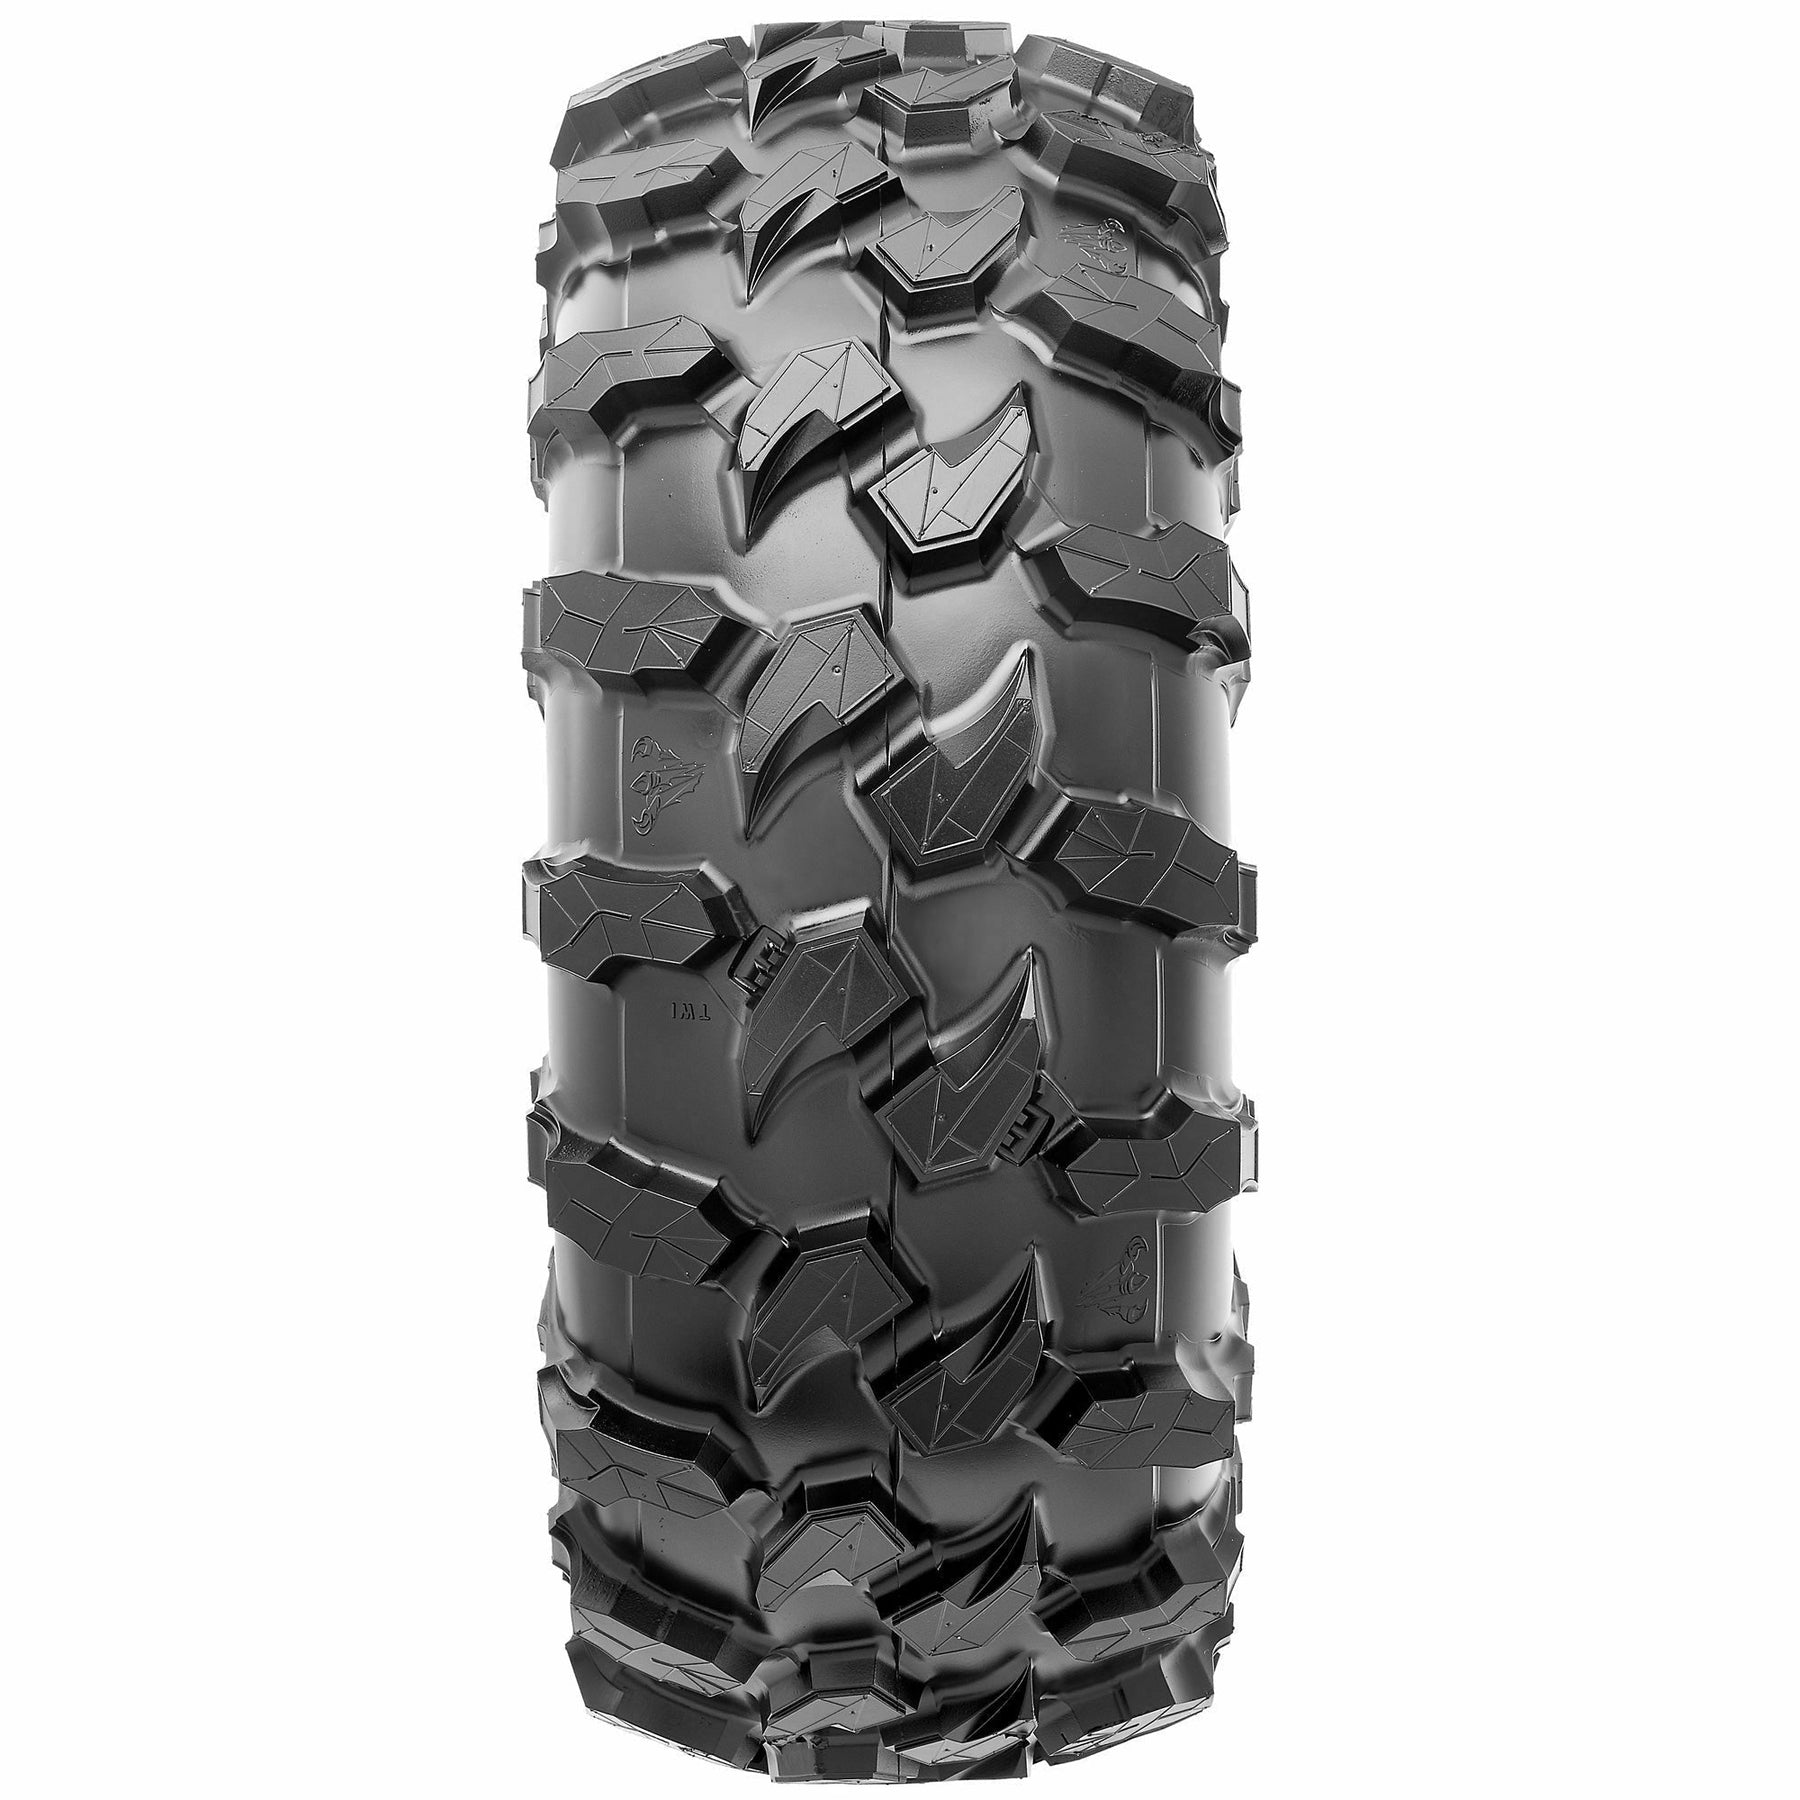 Maxxis Carnage Tire